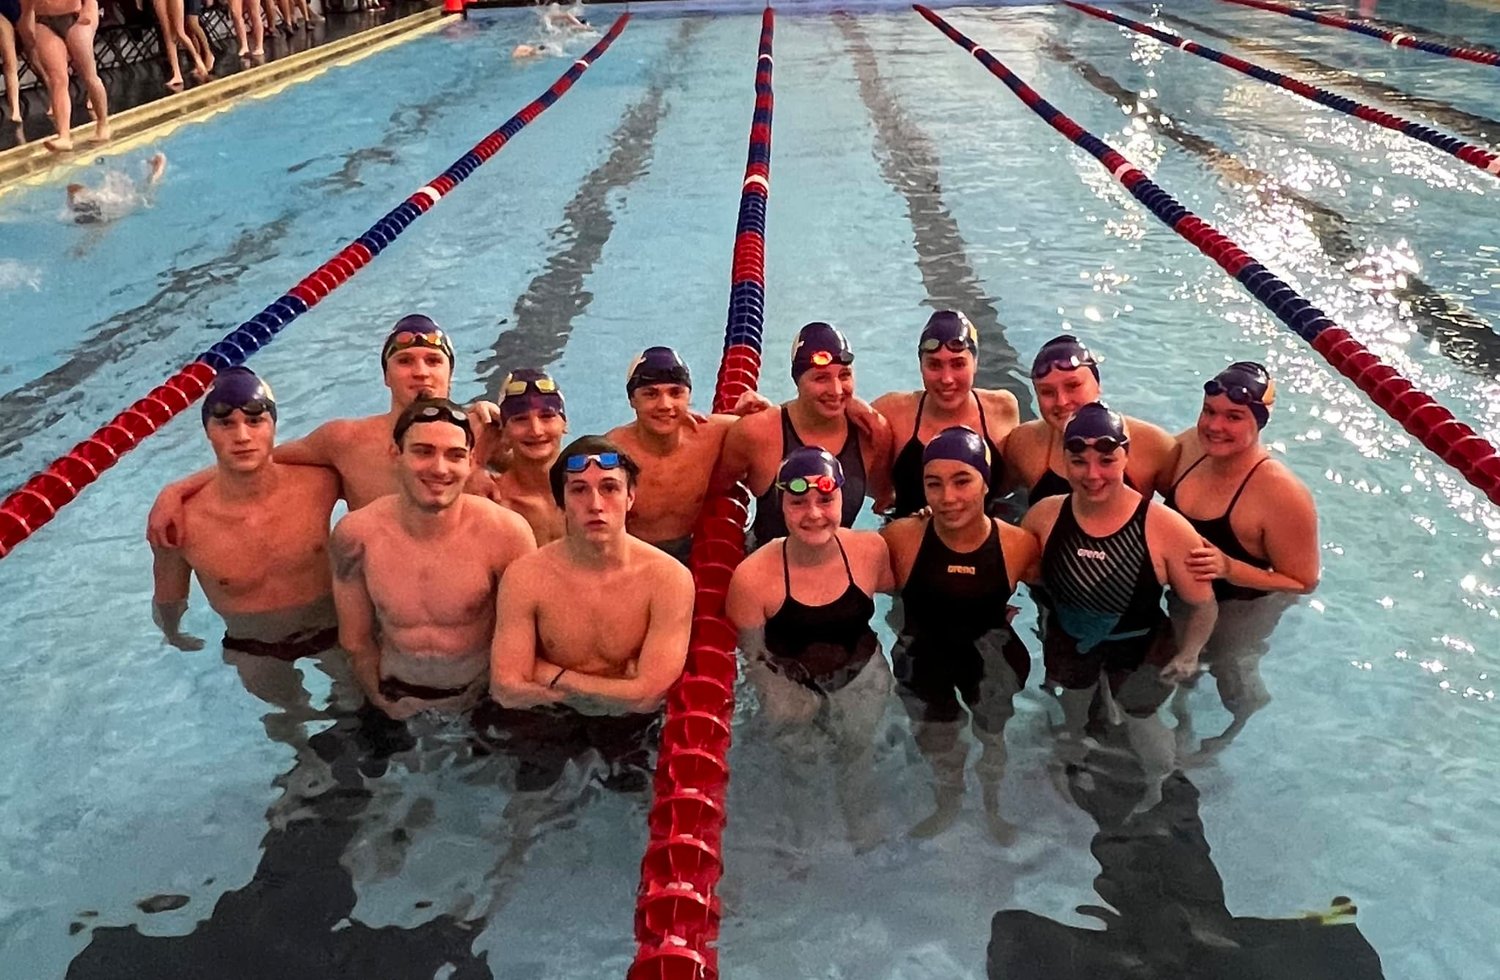 The Daphne Trojan swimmers and divers earned top-four finishes in the team competition at the South Sectional title where five individuals and five relay teams helped solidify their state championship status to represent Daphne at this weekend’s state championship meet in Auburn.